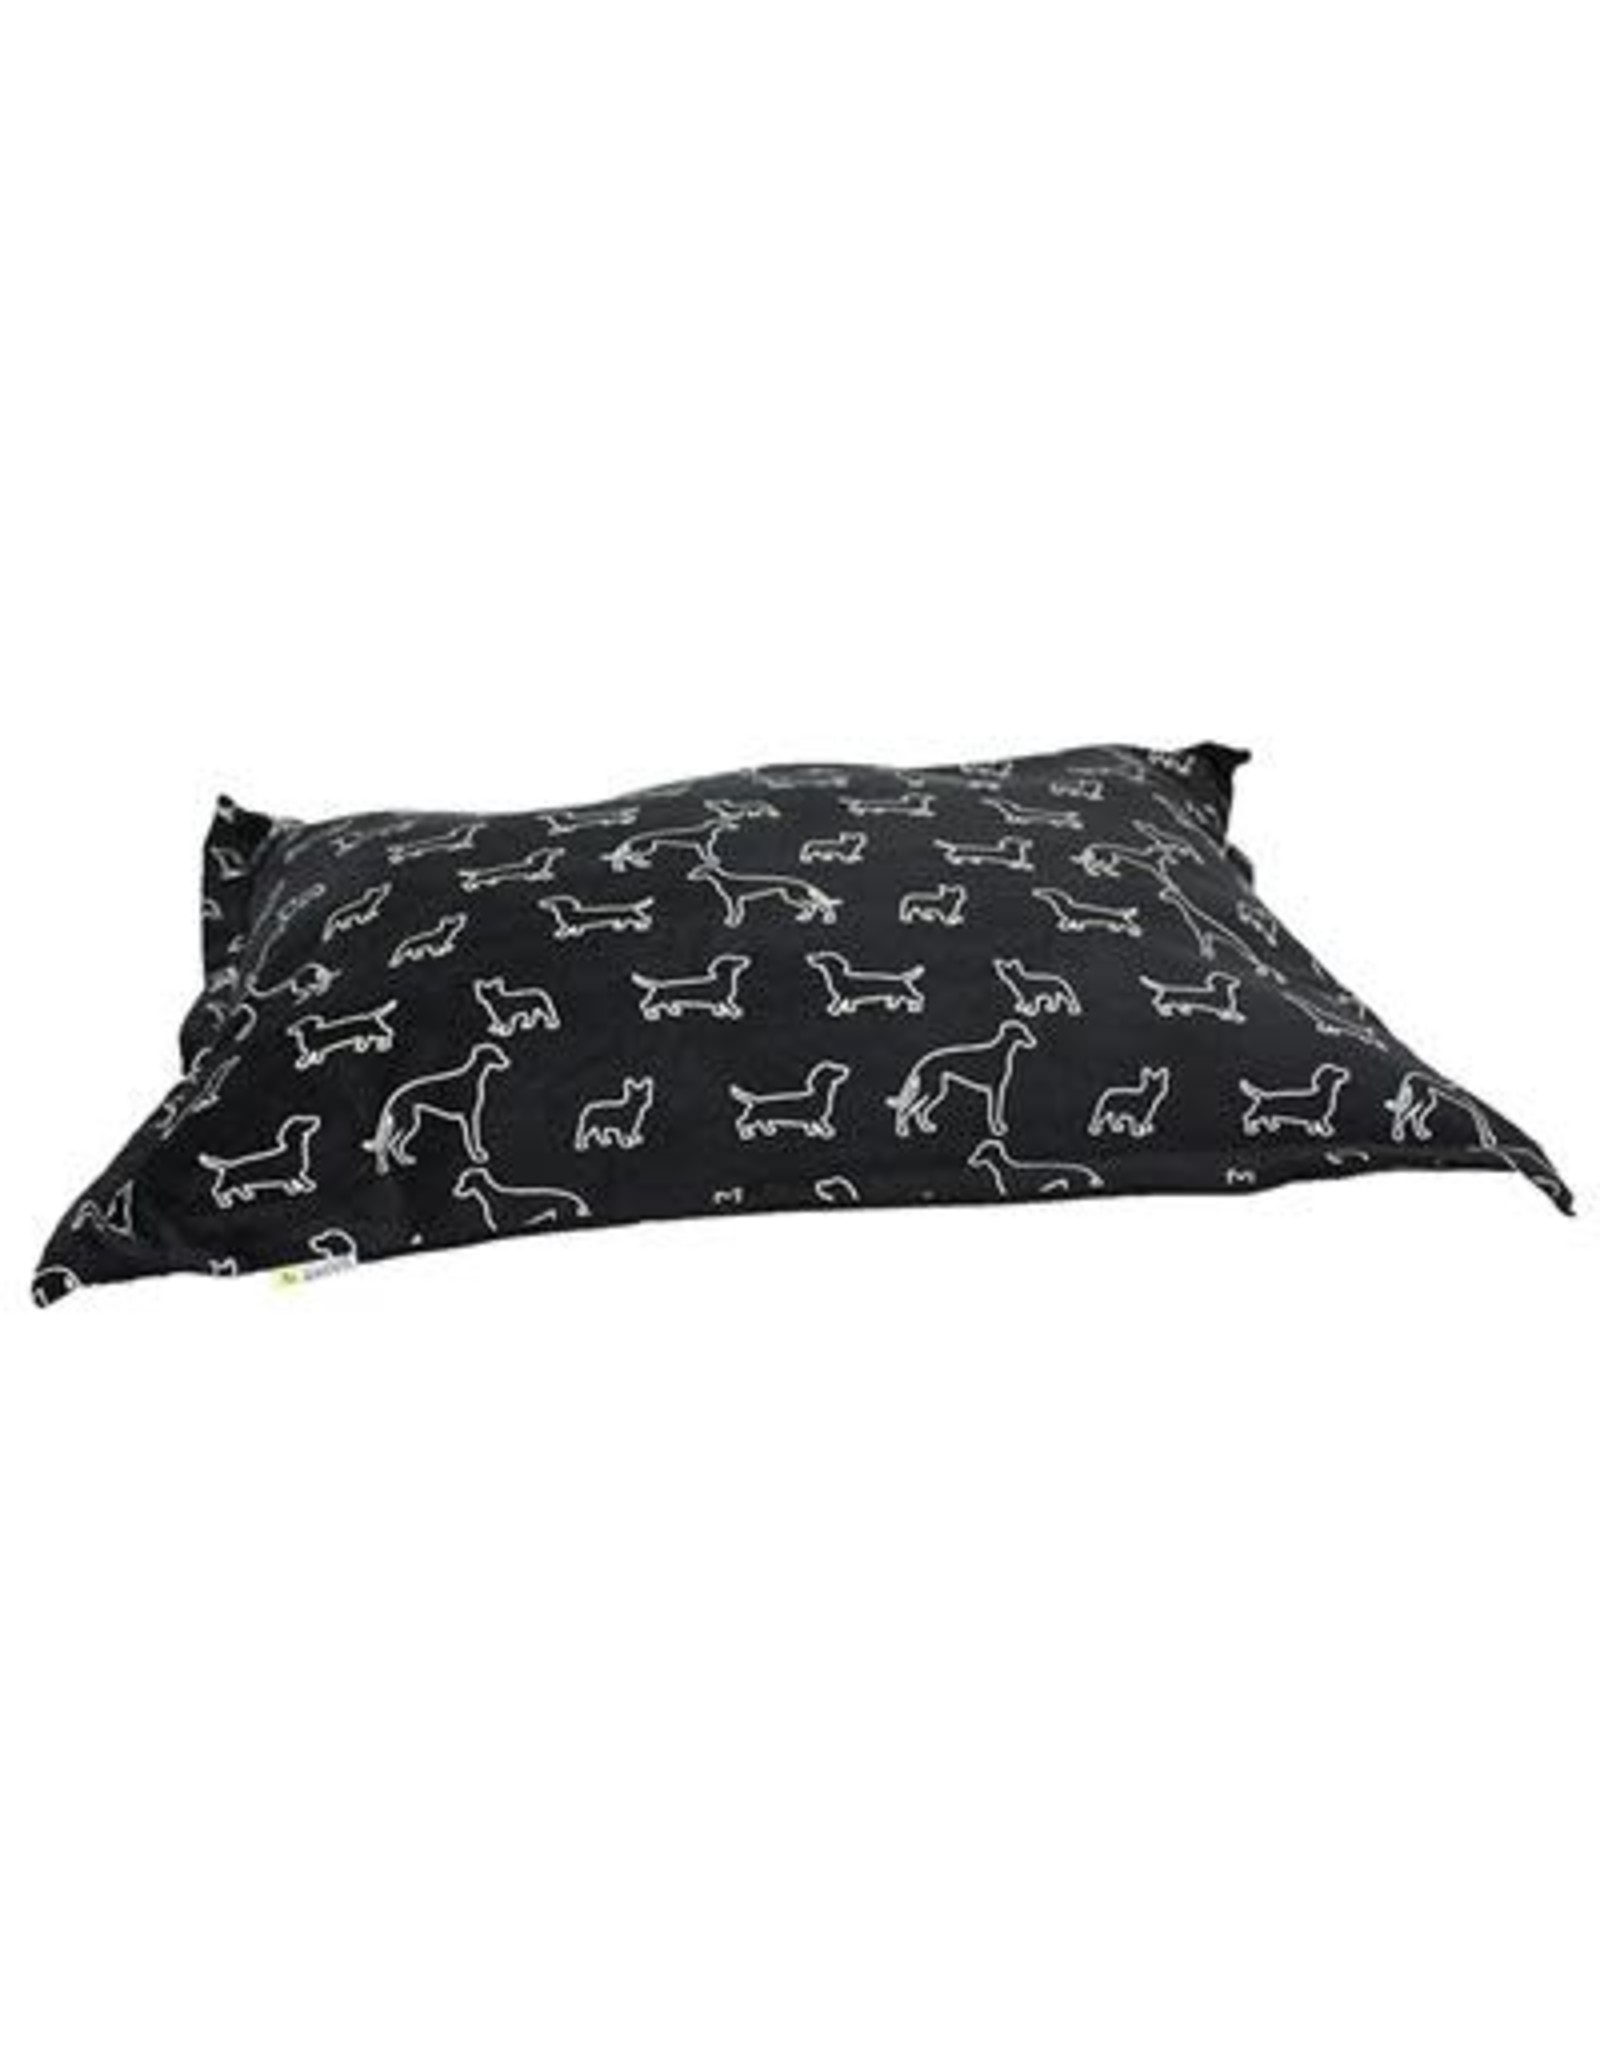 Be One Breed Cloud Pillow Black Doggies Bed Large 35” x 46”